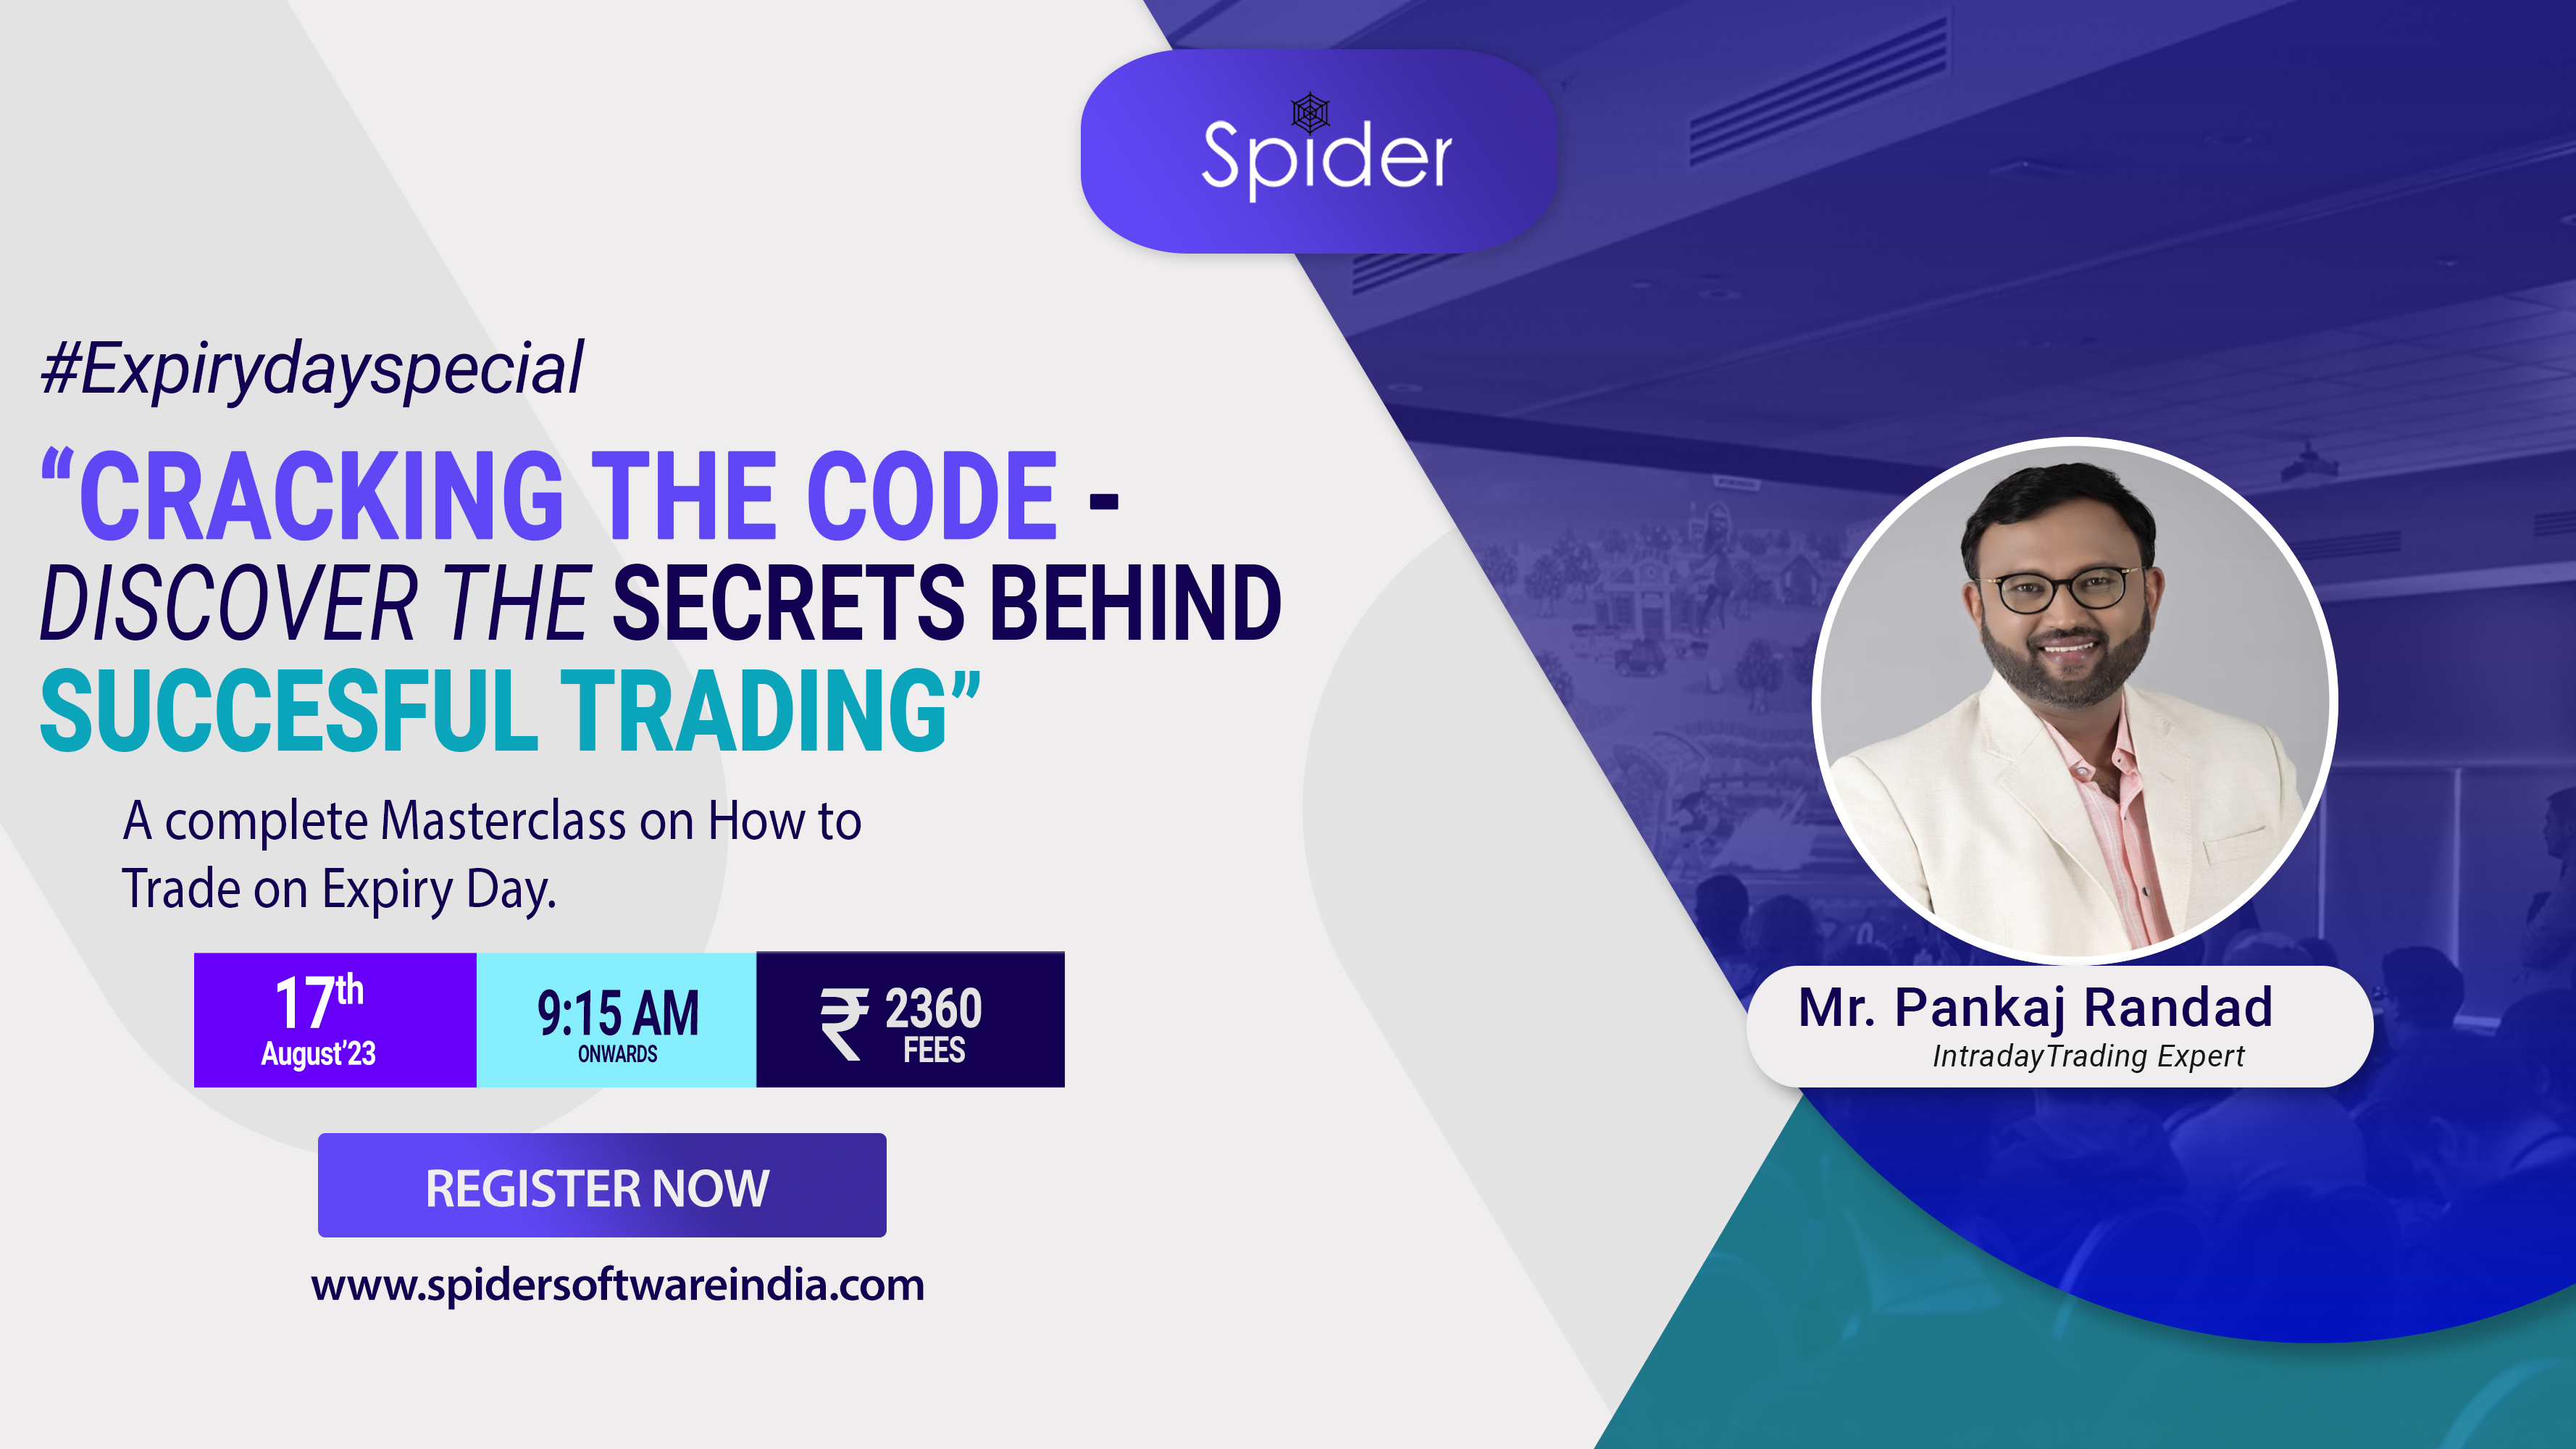 The image is the feature of the Webinar on Cracking the code of Succesful Trading in Expiry Day.